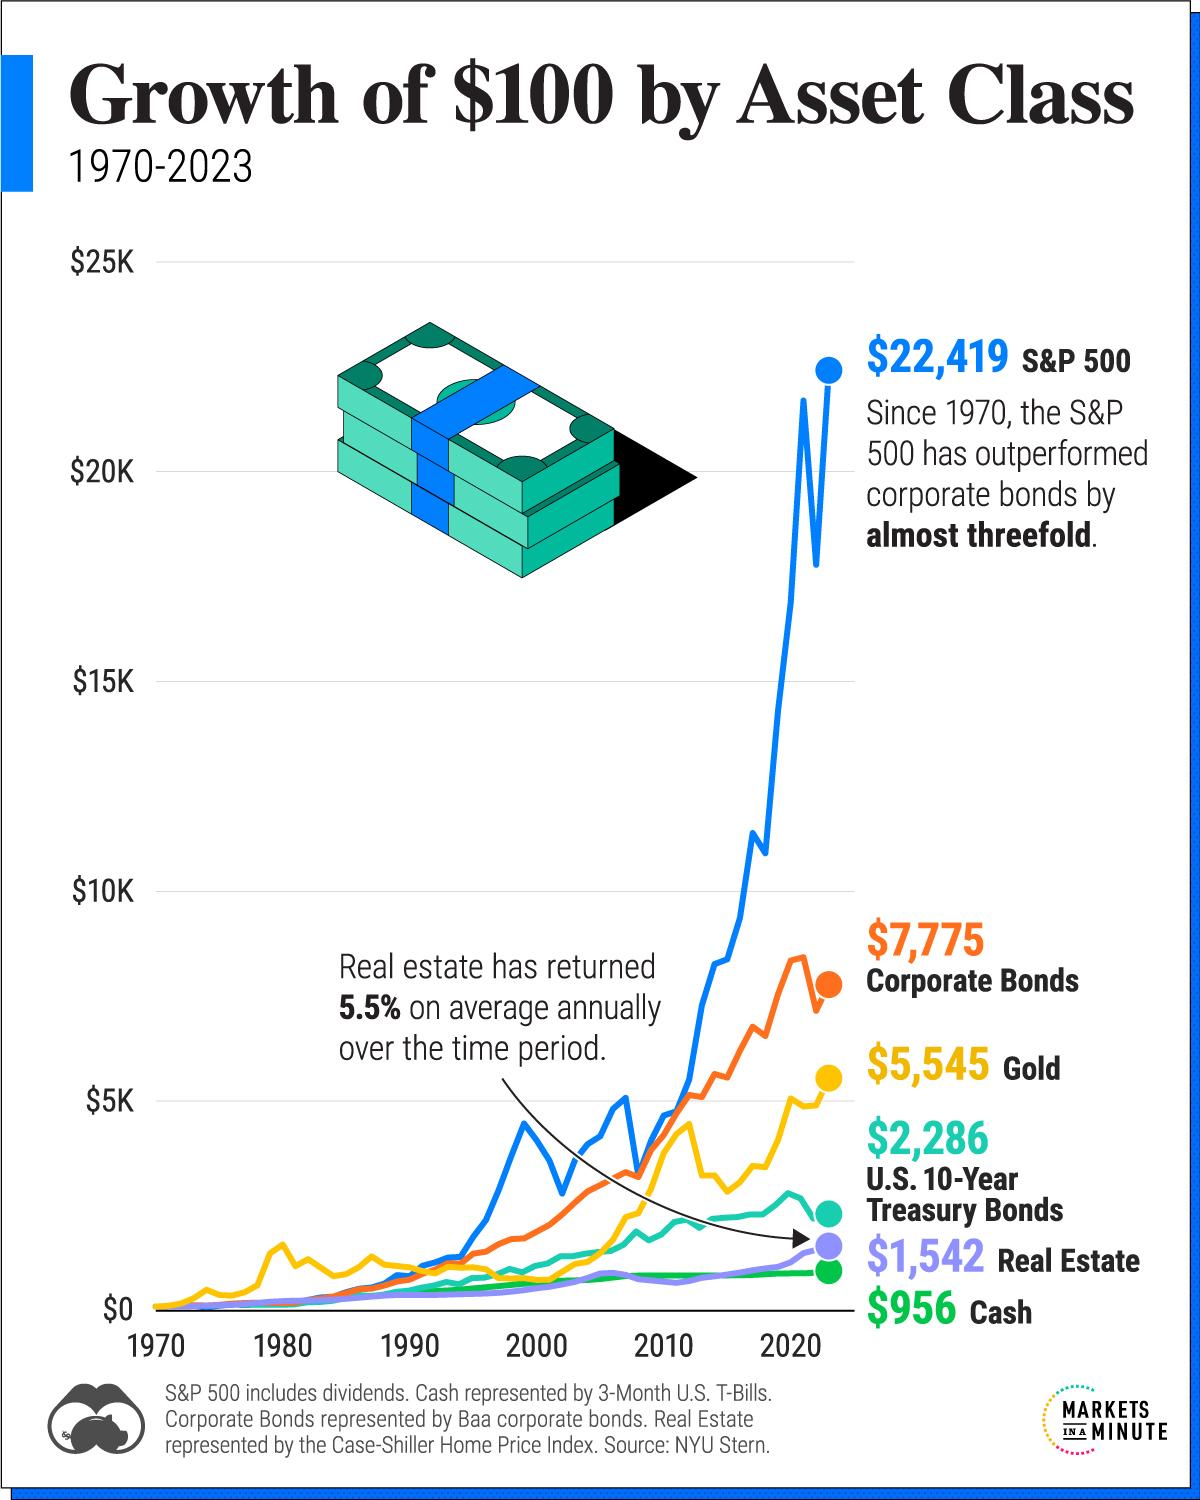 The Growth of $100 by Asset Class (1970-2023)